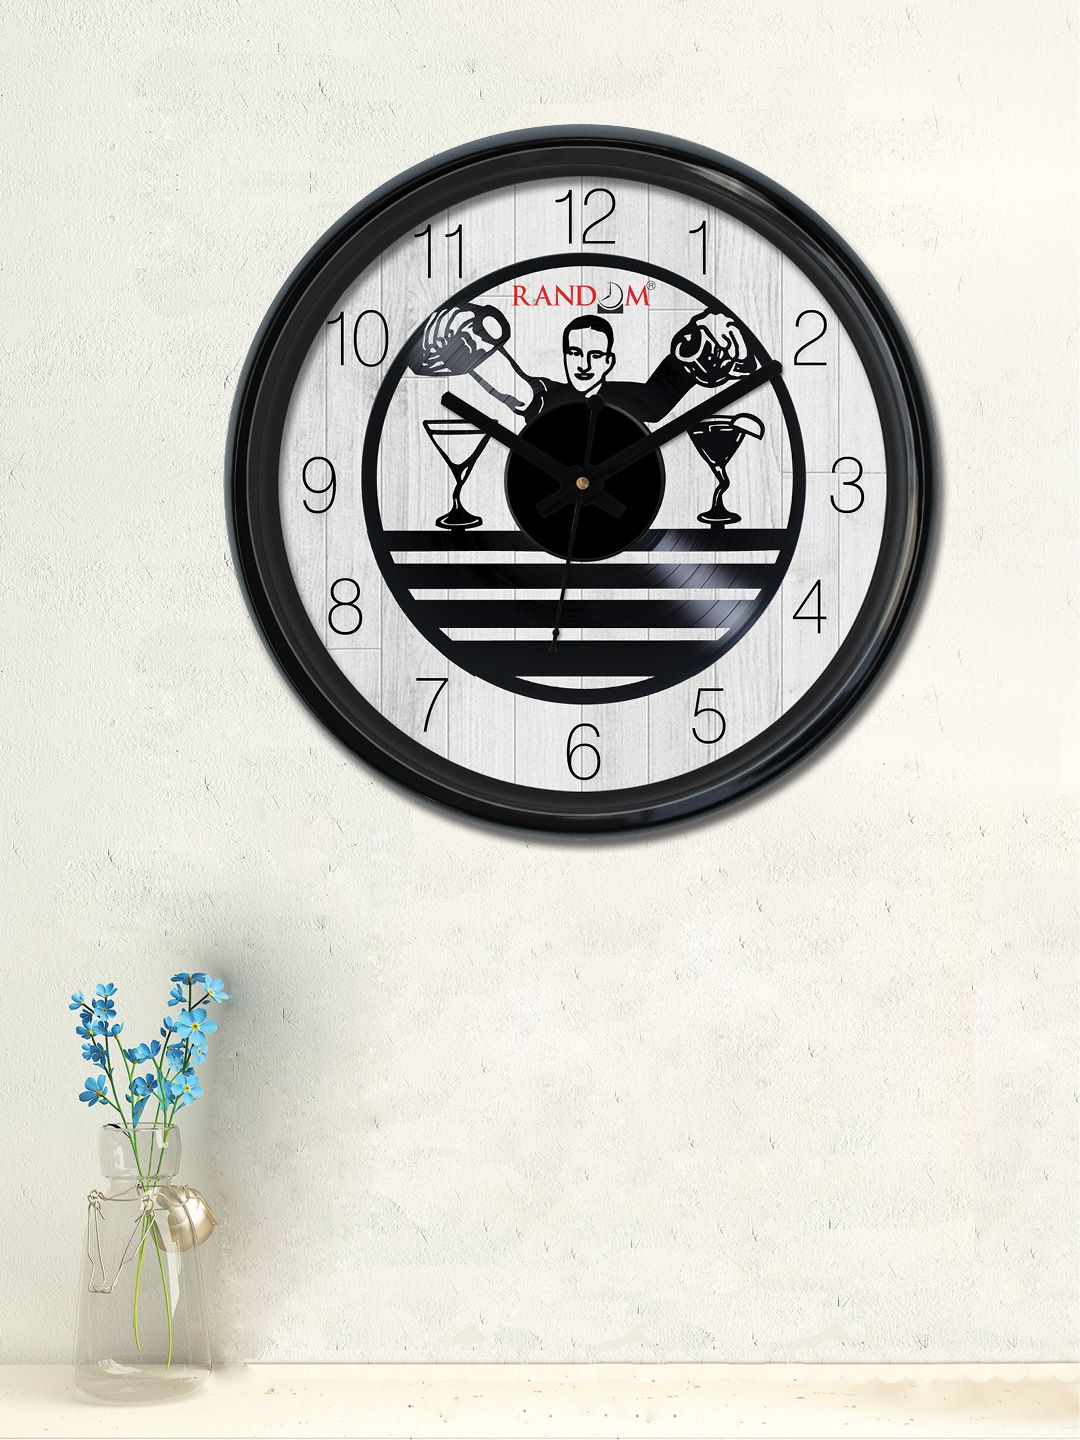 RANDOM Off-White & Black Round Printed 30 cm Analogue Wall Clock Price in India